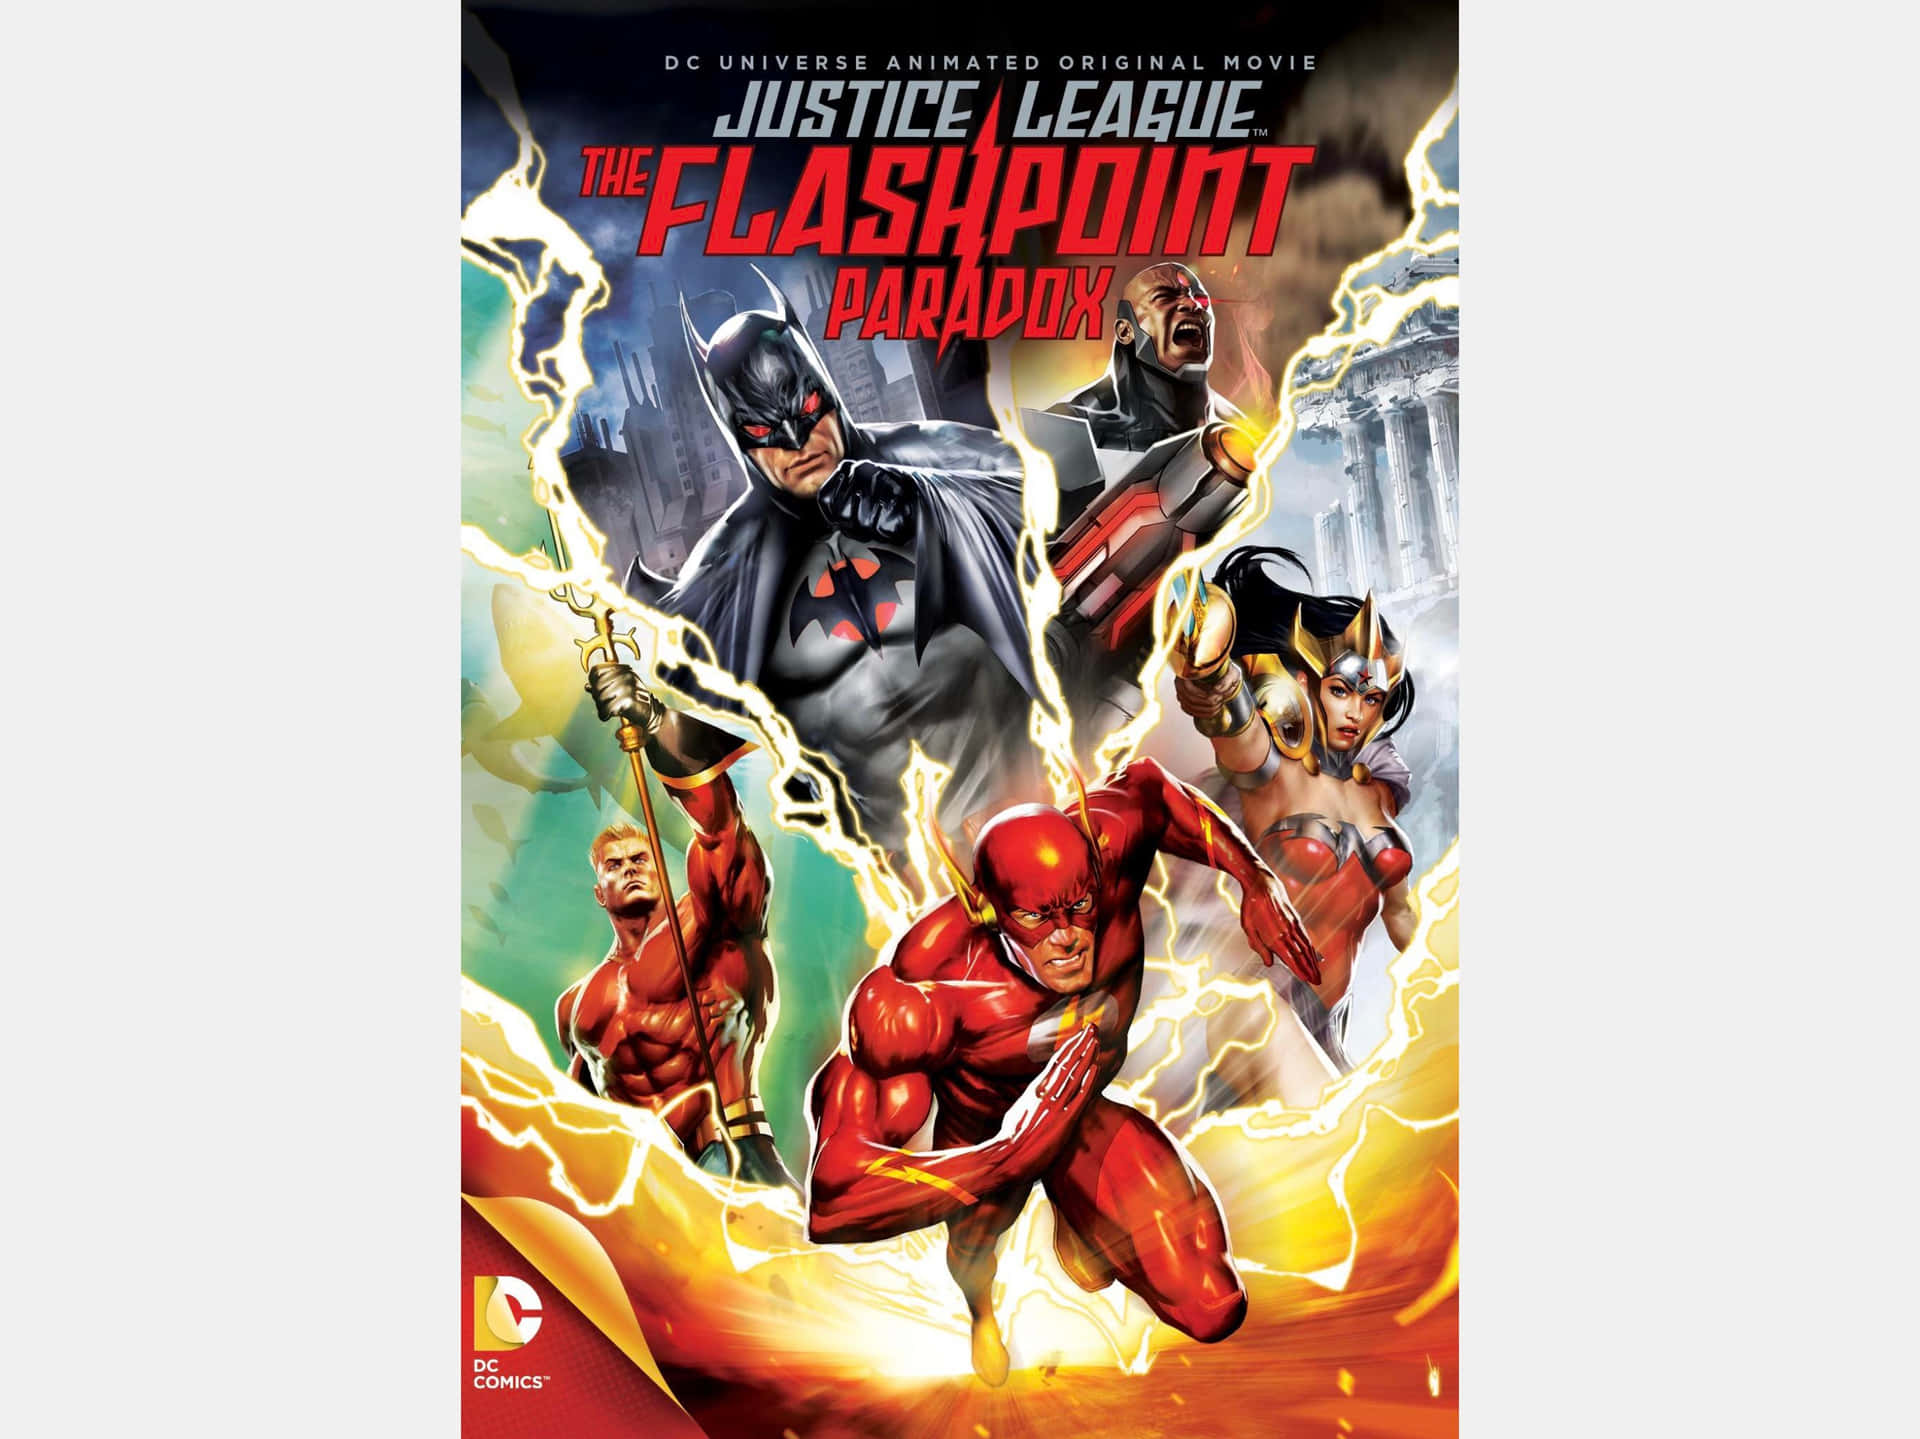 The Flashpoint Paradox: A Turning Point for the Justice League Wallpaper